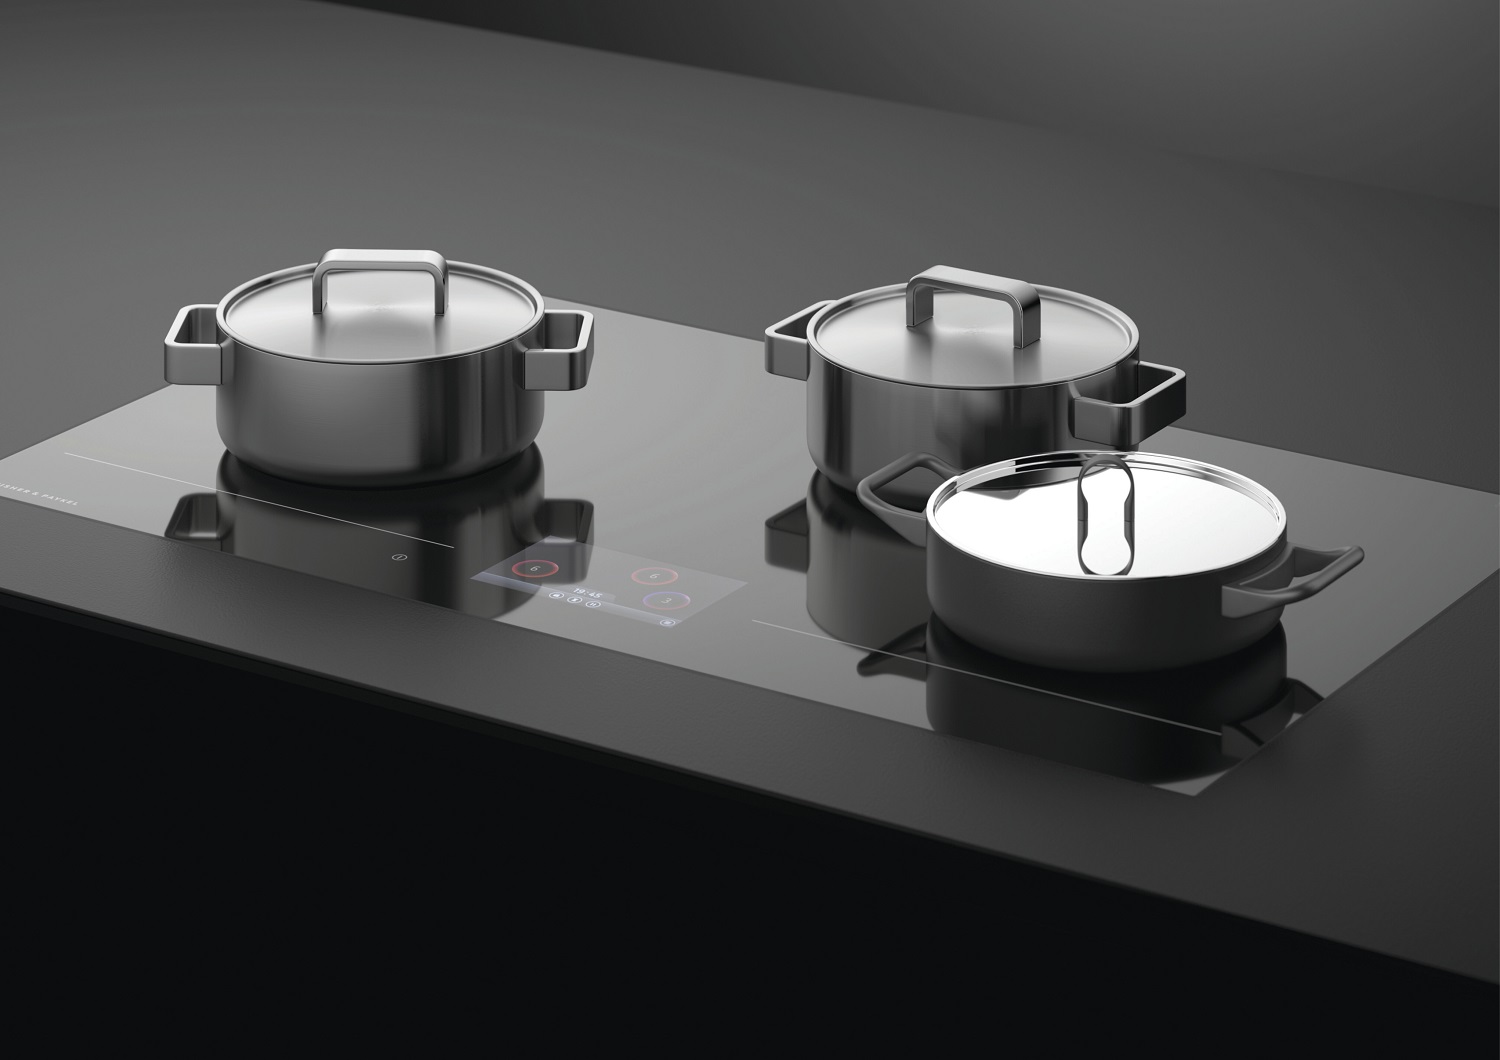 Fosher & Paykel full Surface Induction hob